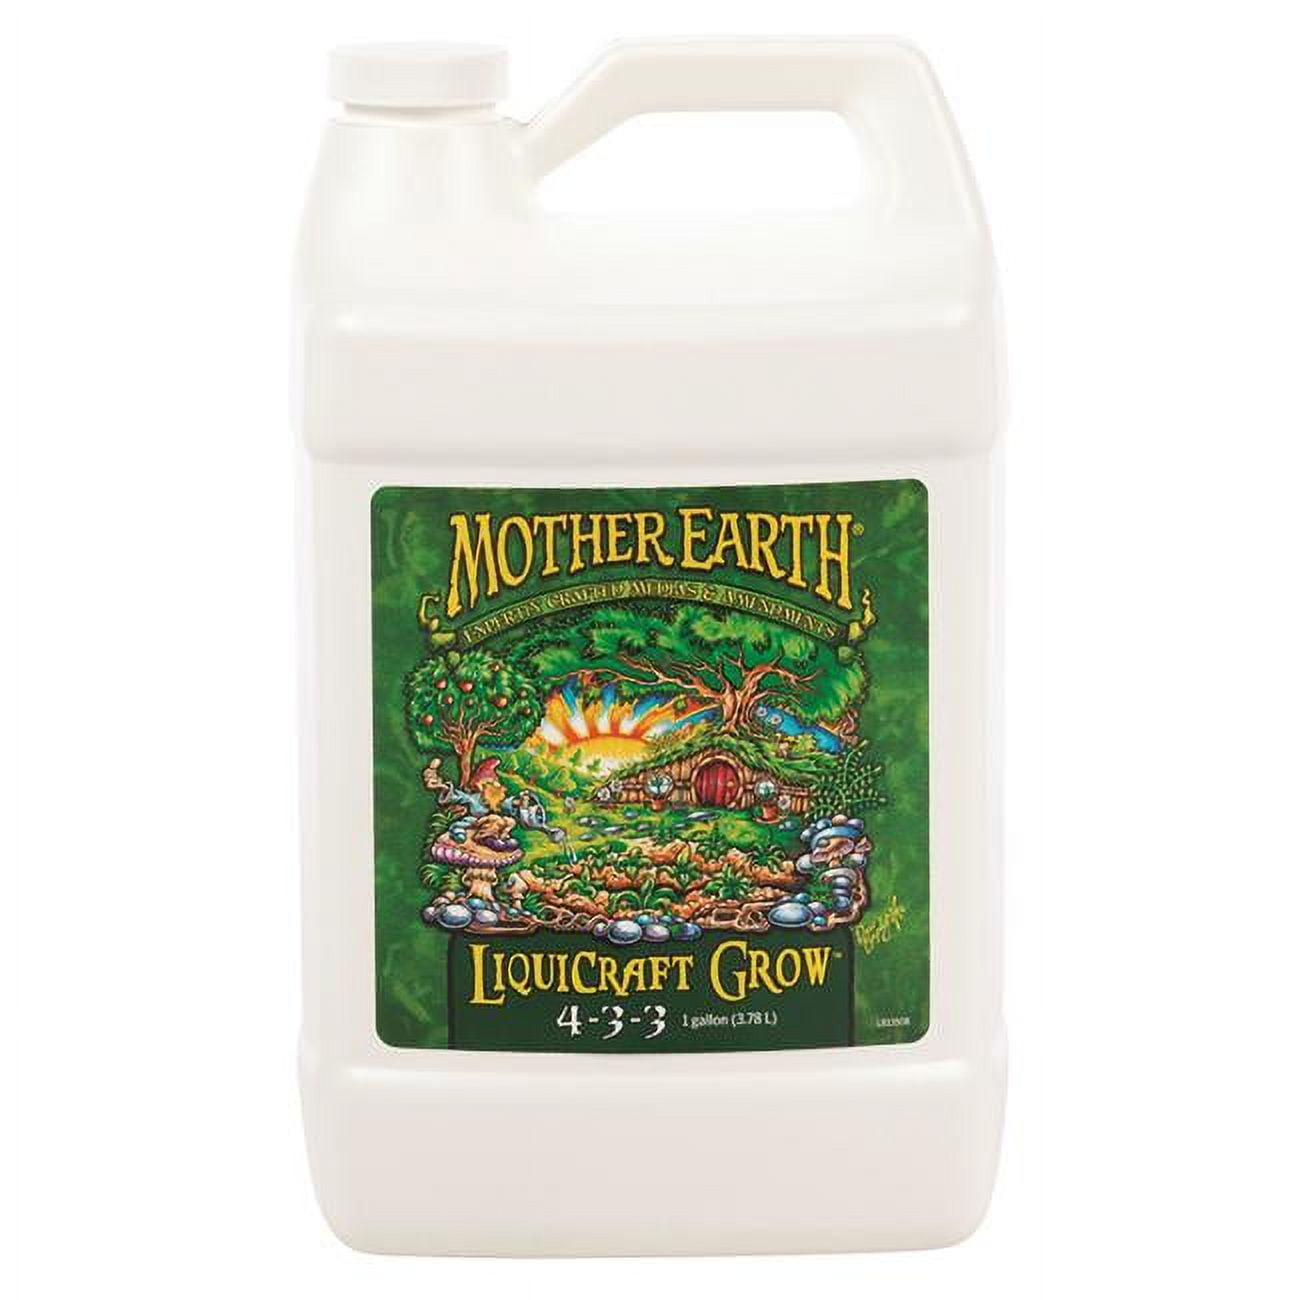 Picture of Mother Earth 7004441 1 gal LiquiCraft Grow 4-3-3 Hydroponic Plant Nutrients